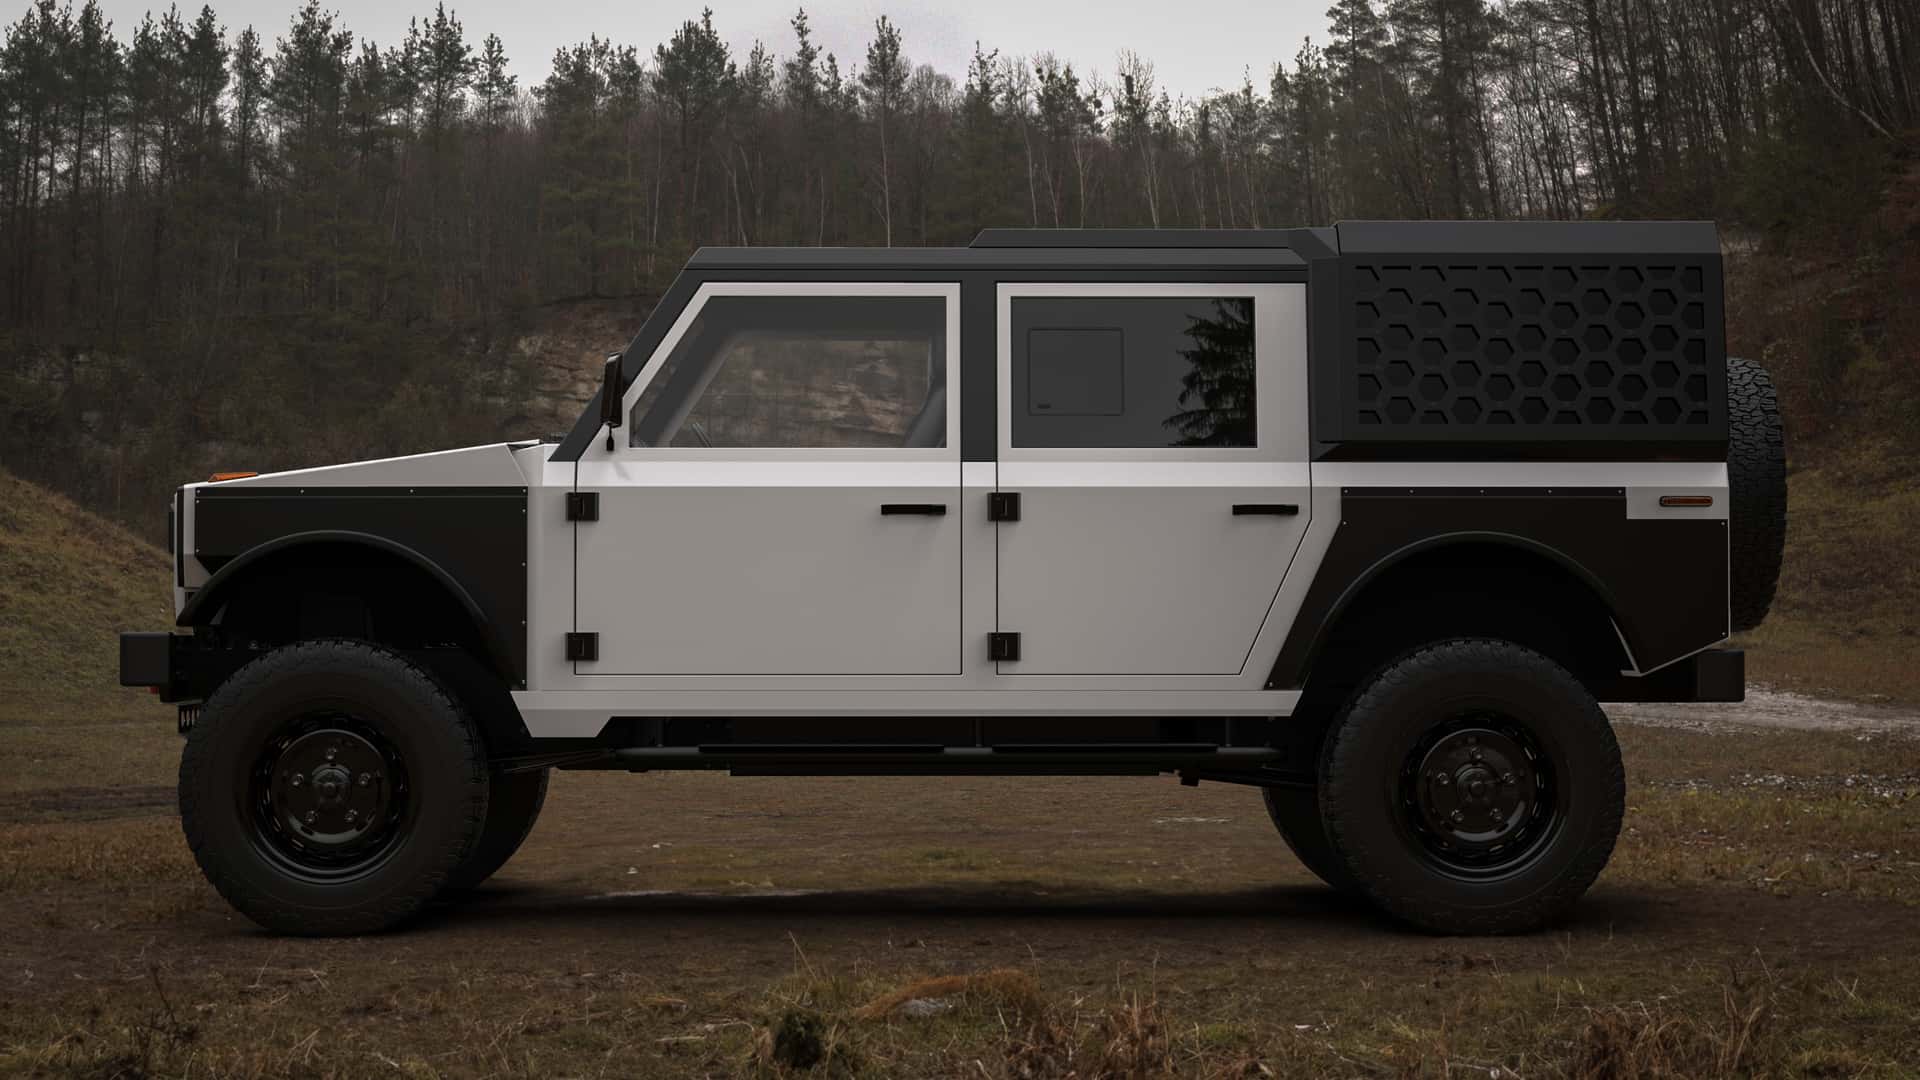 munro series-m electric 4x4 debuts with more creature comforts, lfp battery